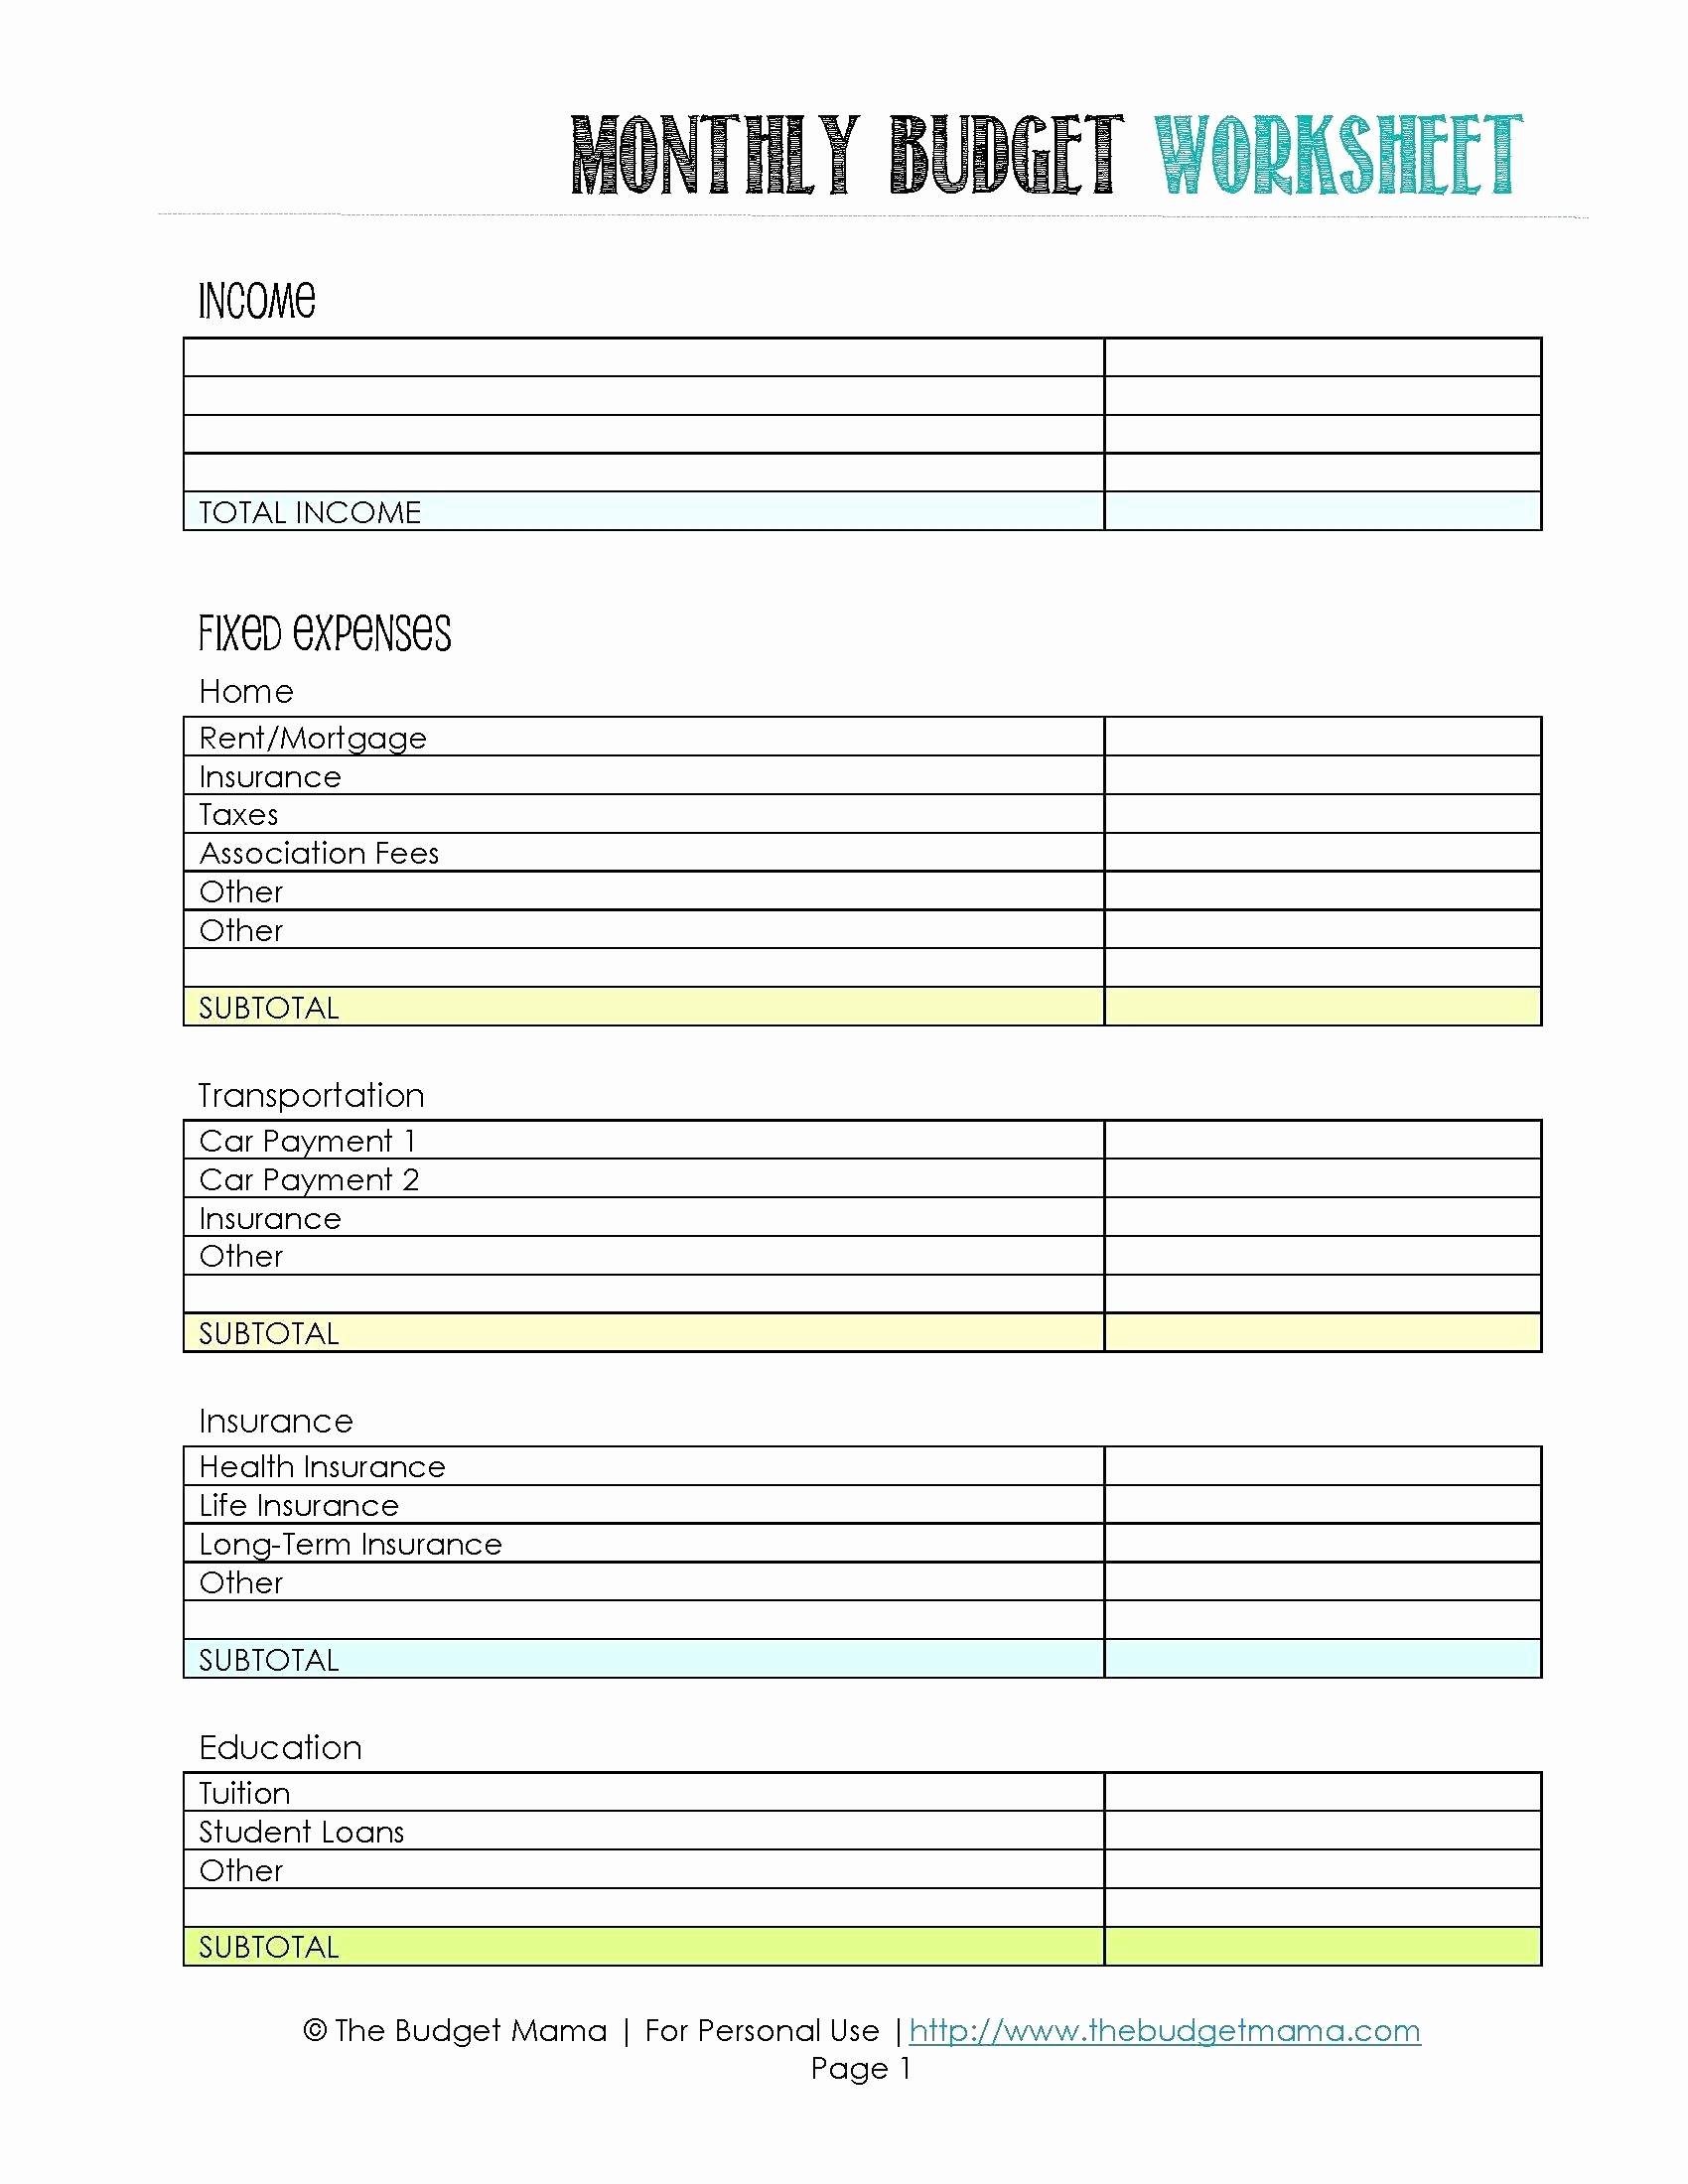 Restaurant Expenses Spreadsheet In Income And Expense Spreadsheet Template Excel For Restaurant Bud